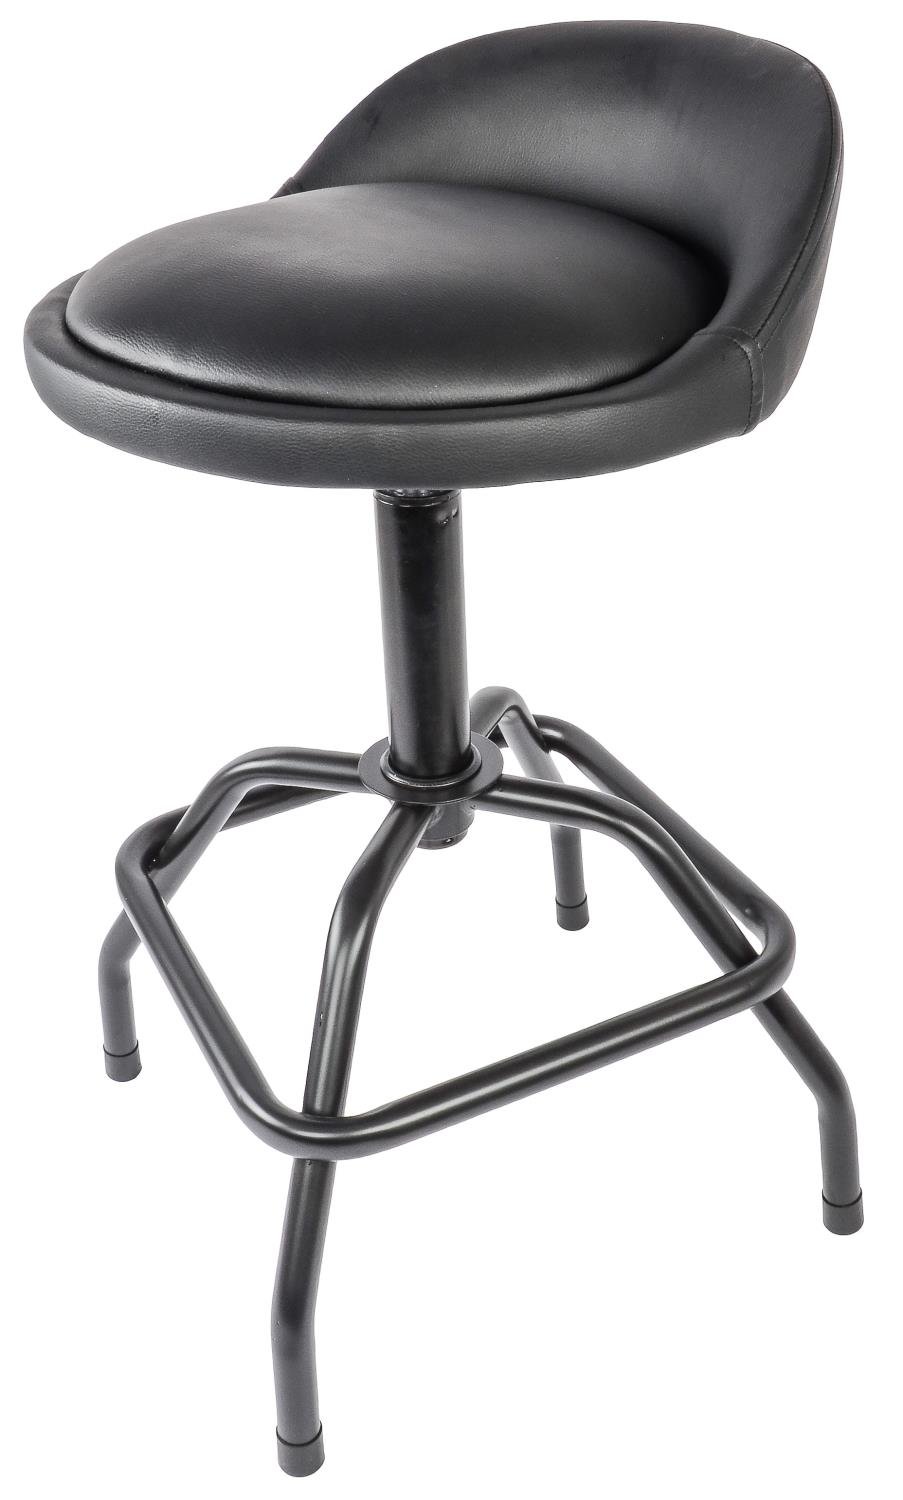 OEMTOOLS 24910 Garage Counter Stool, Matte Black Finish, Stool Chair for  Shop Work, Work Bench Swivel Stool, Garage Work Bench Stool, Cushioned  Stools